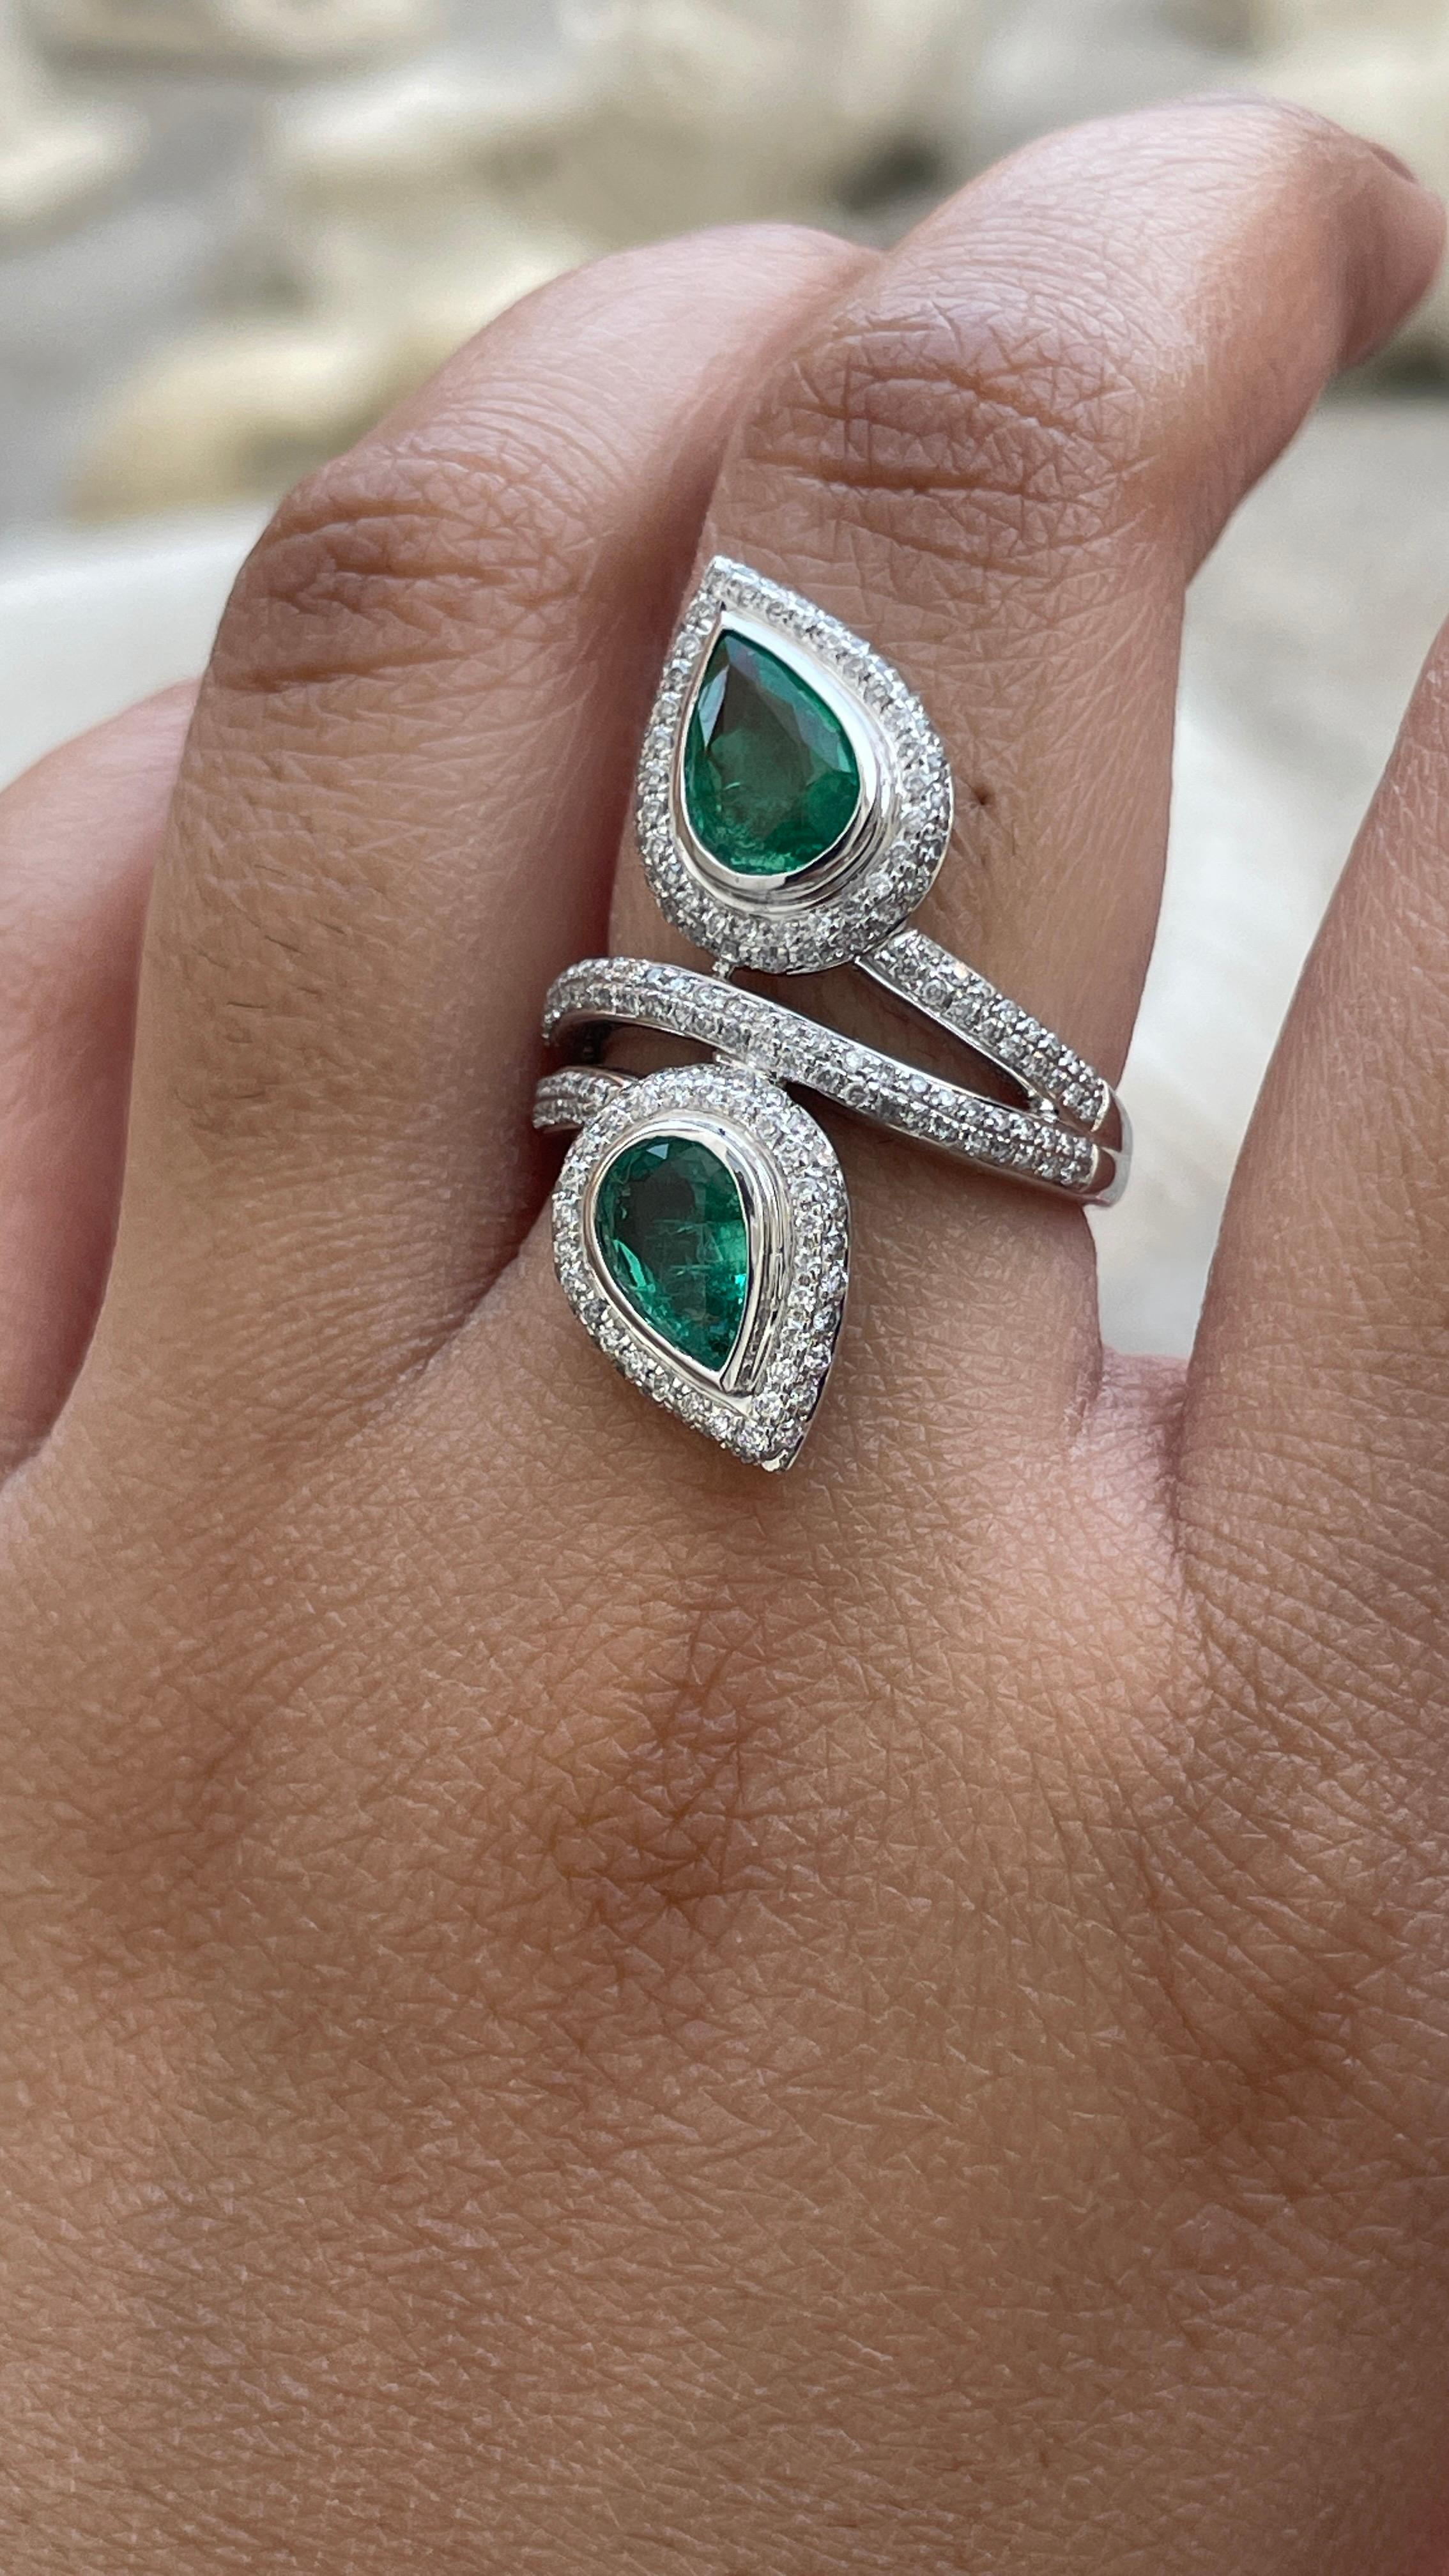 For Sale:  Pear Cut Emerald Cocktail Ring with Diamonds in 14K Solid White Gold 2